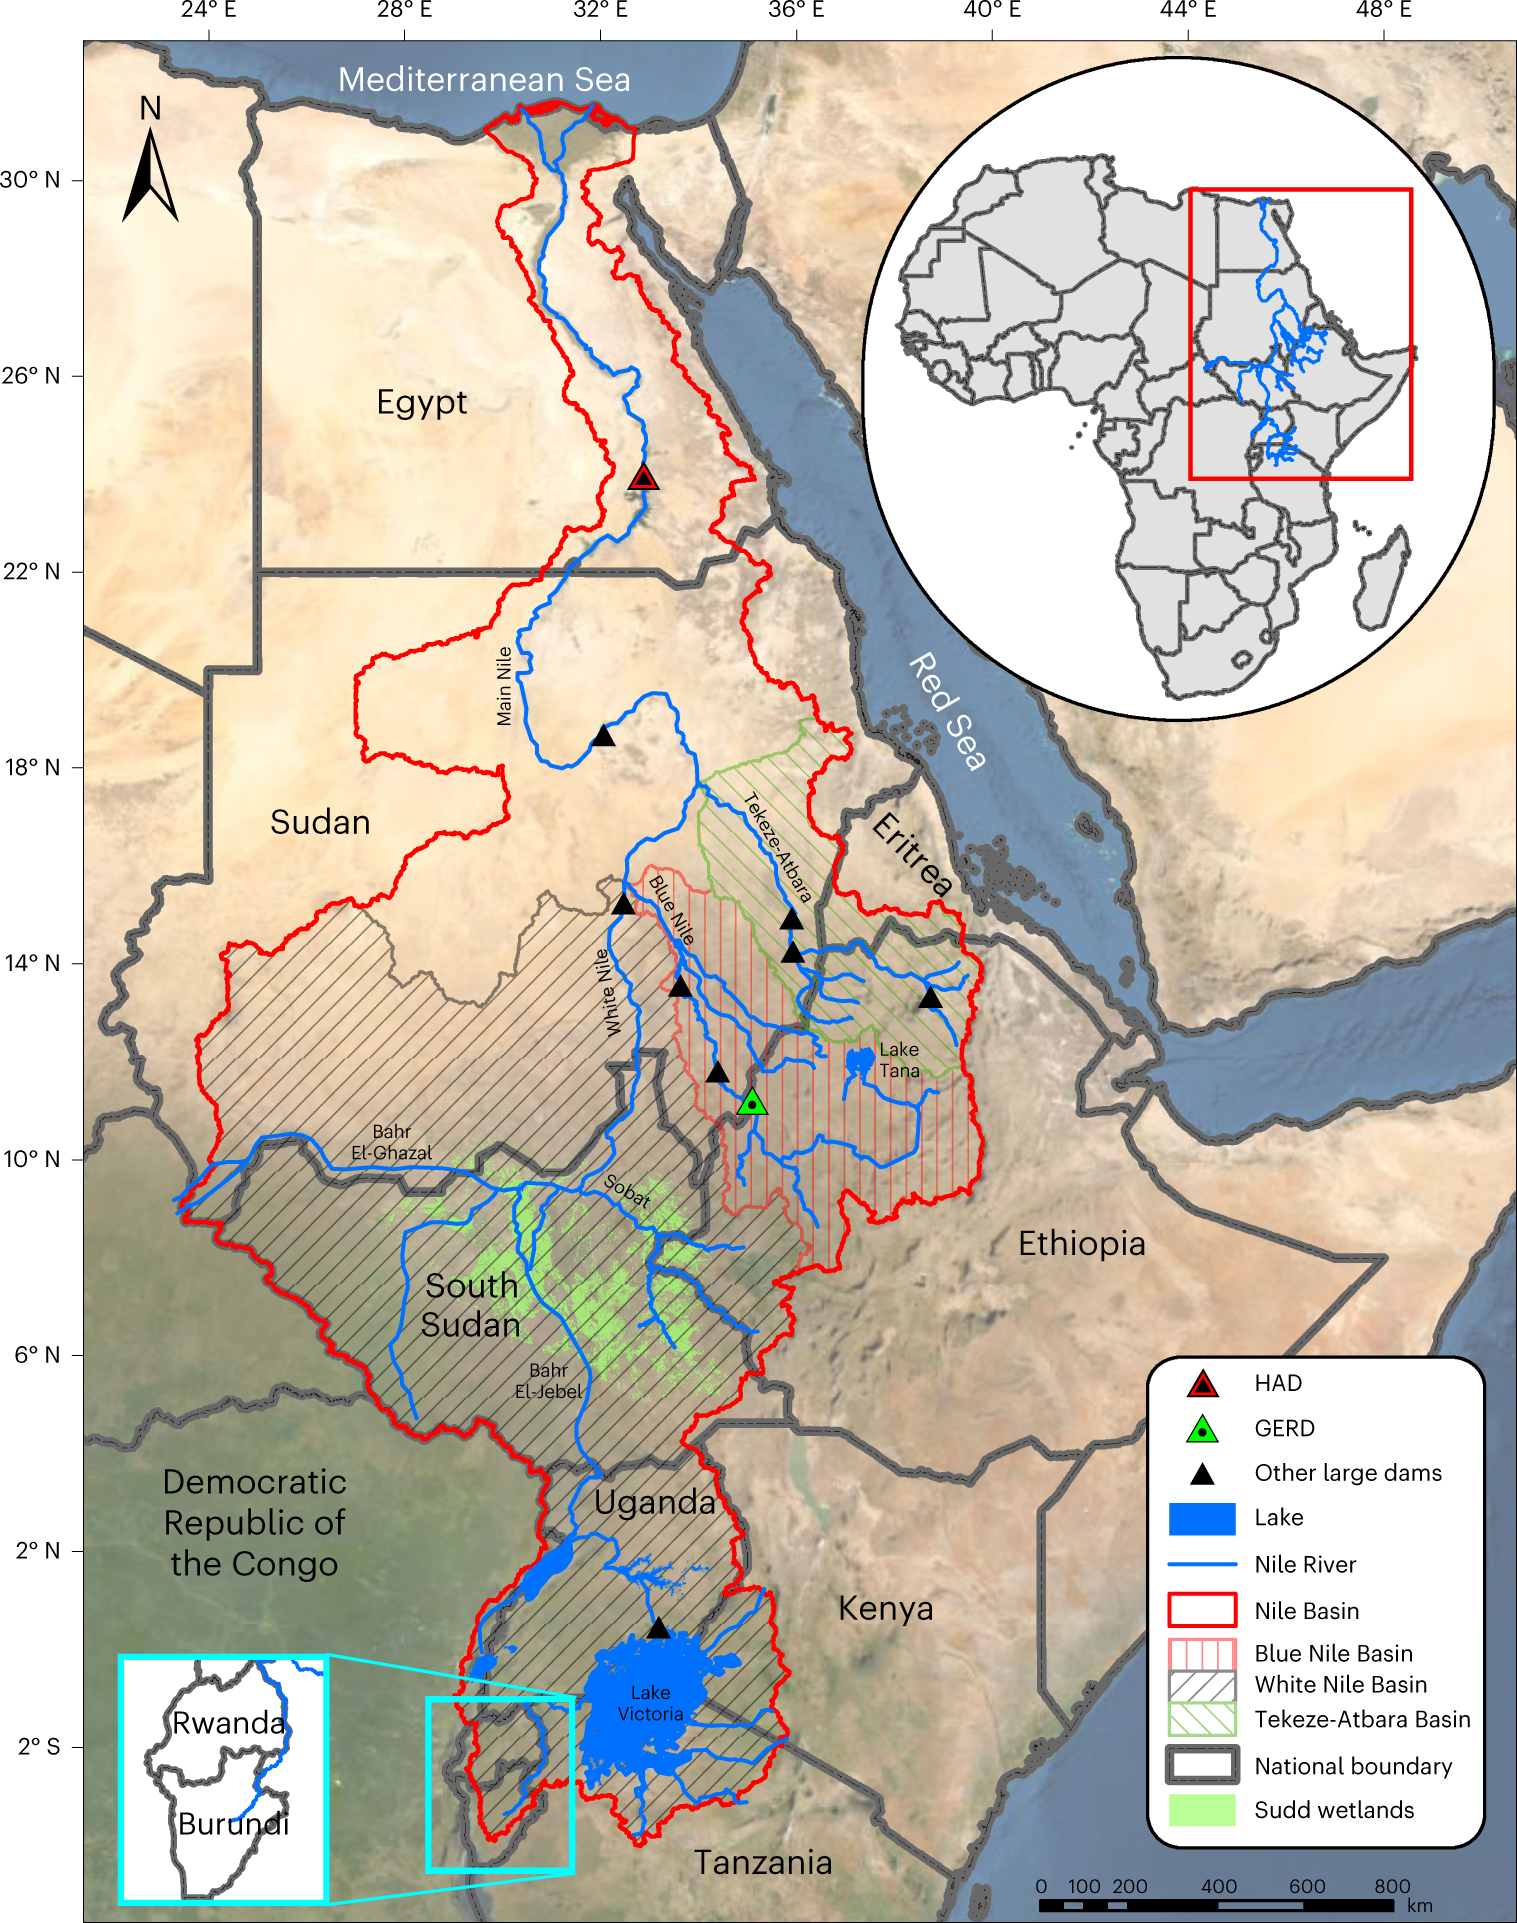 Cooperative adaptive management of the Nile River with climate and